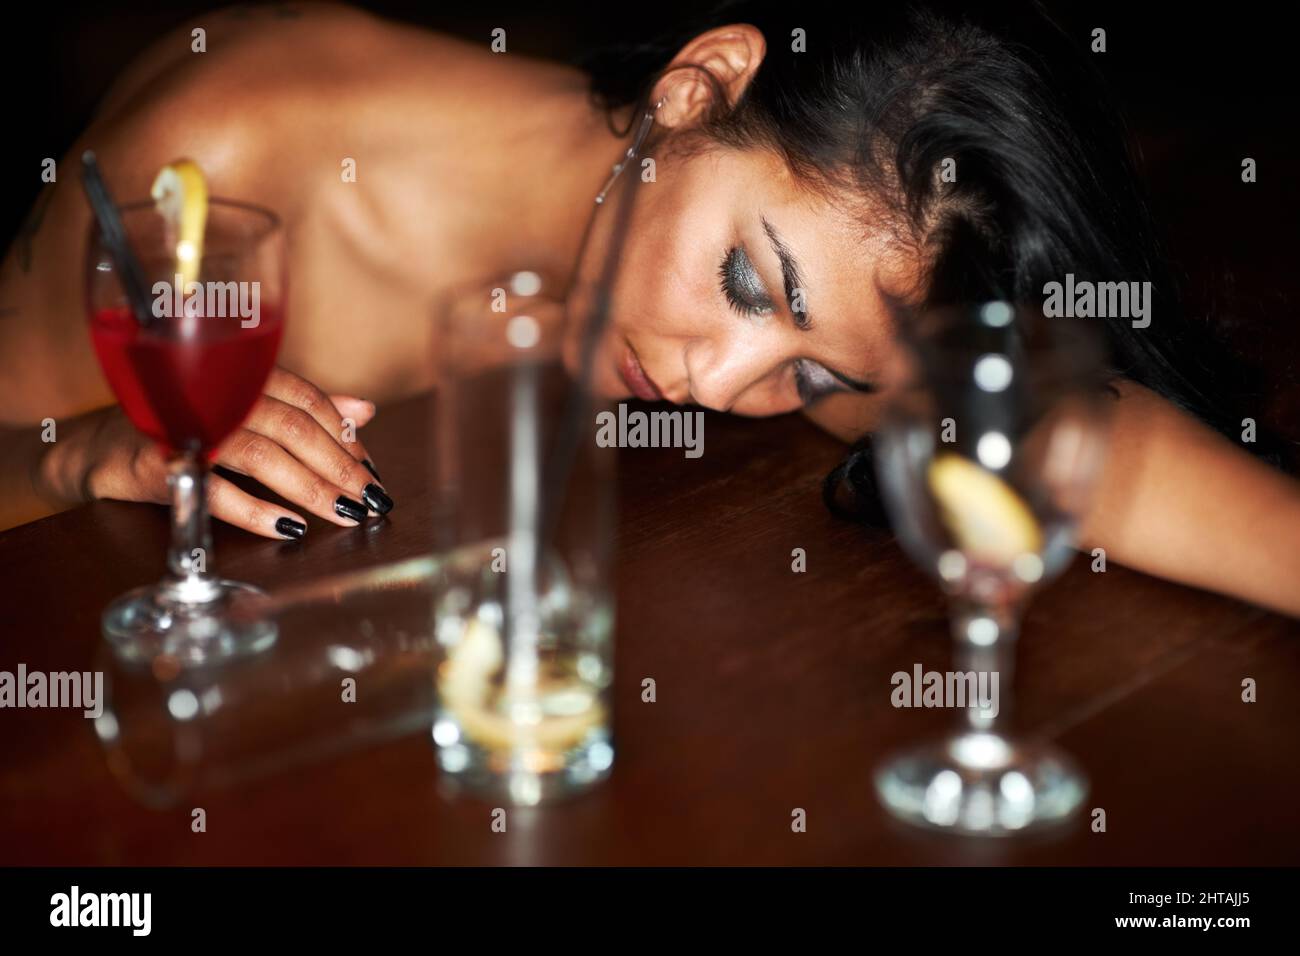 Her night is at its end. A drunk young girl passed out at the bar surrounded by half-finished drinks. Stock Photo